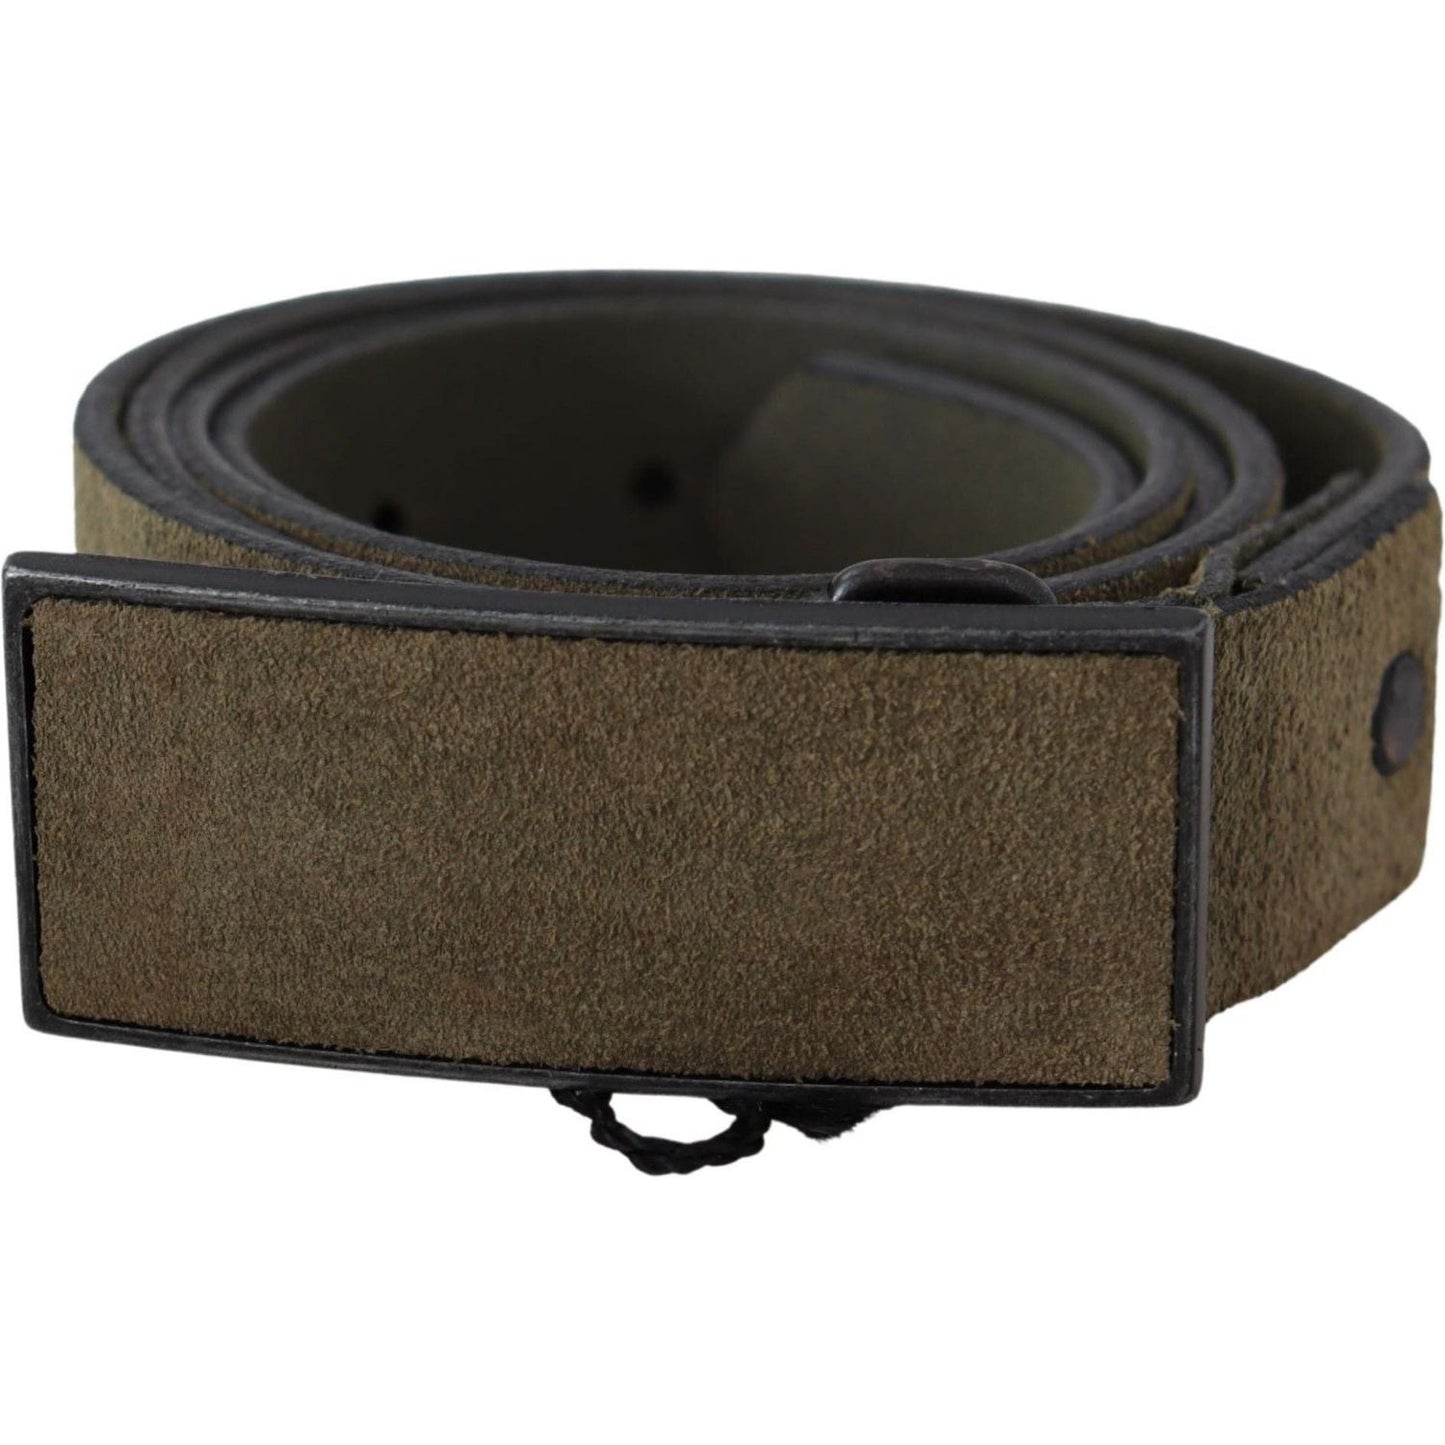 Costume National Chic Army Green Velvet Buckle Leather Belt Belt green-leather-velvet-buckle-waist-army-belt